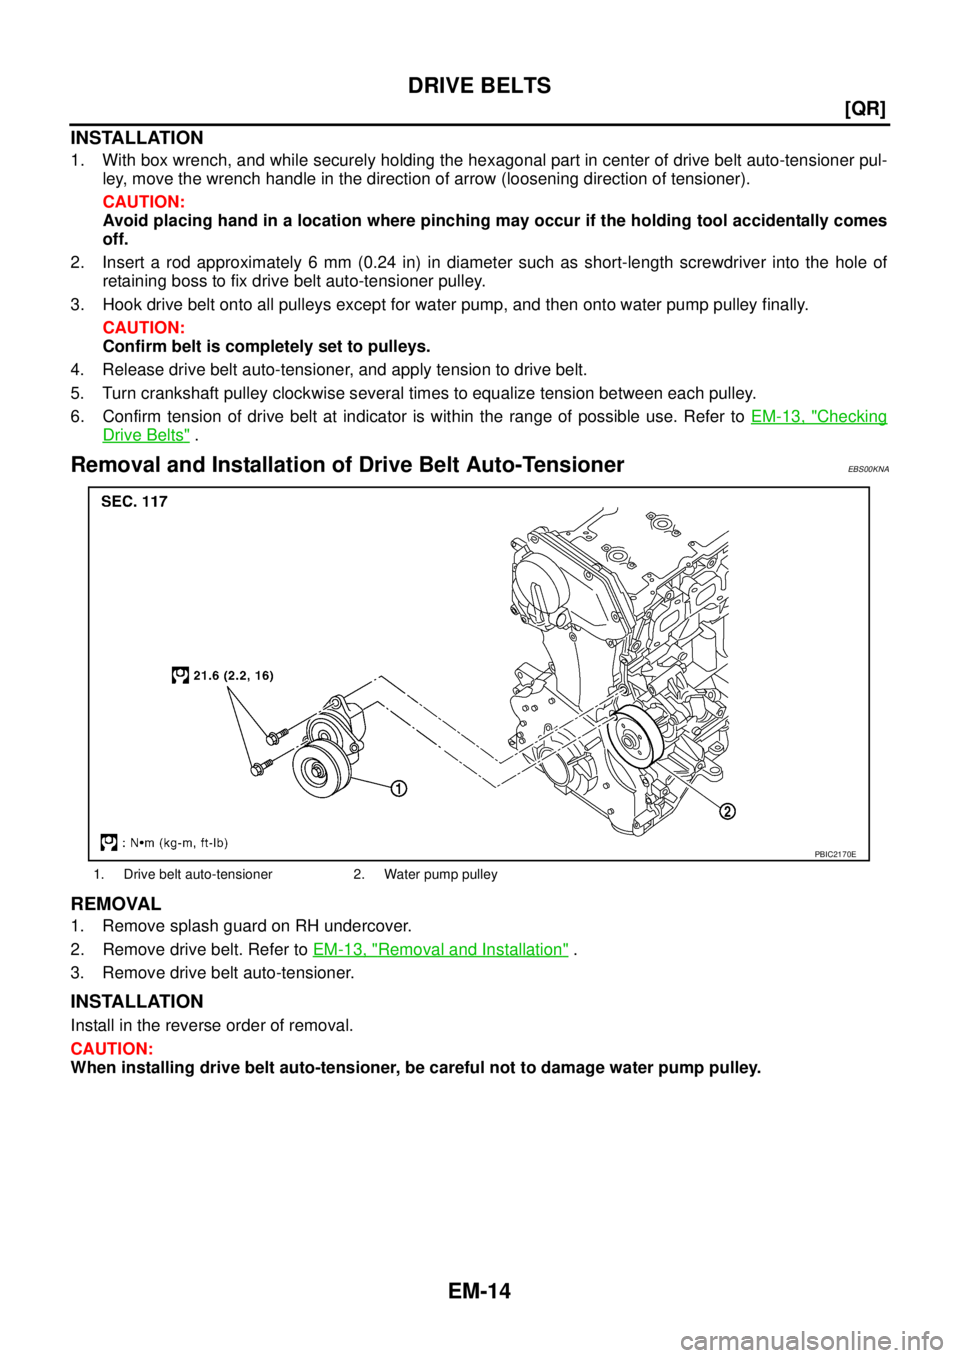 NISSAN X-TRAIL 2003  Service Repair Manual EM-14
[QR]
DRIVE BELTS
 
INSTALLATION
1. With box wrench, and while securely holding the hexagonal part in center of drive belt auto-tensioner pul-
ley, move the wrench handle in the direction of arro